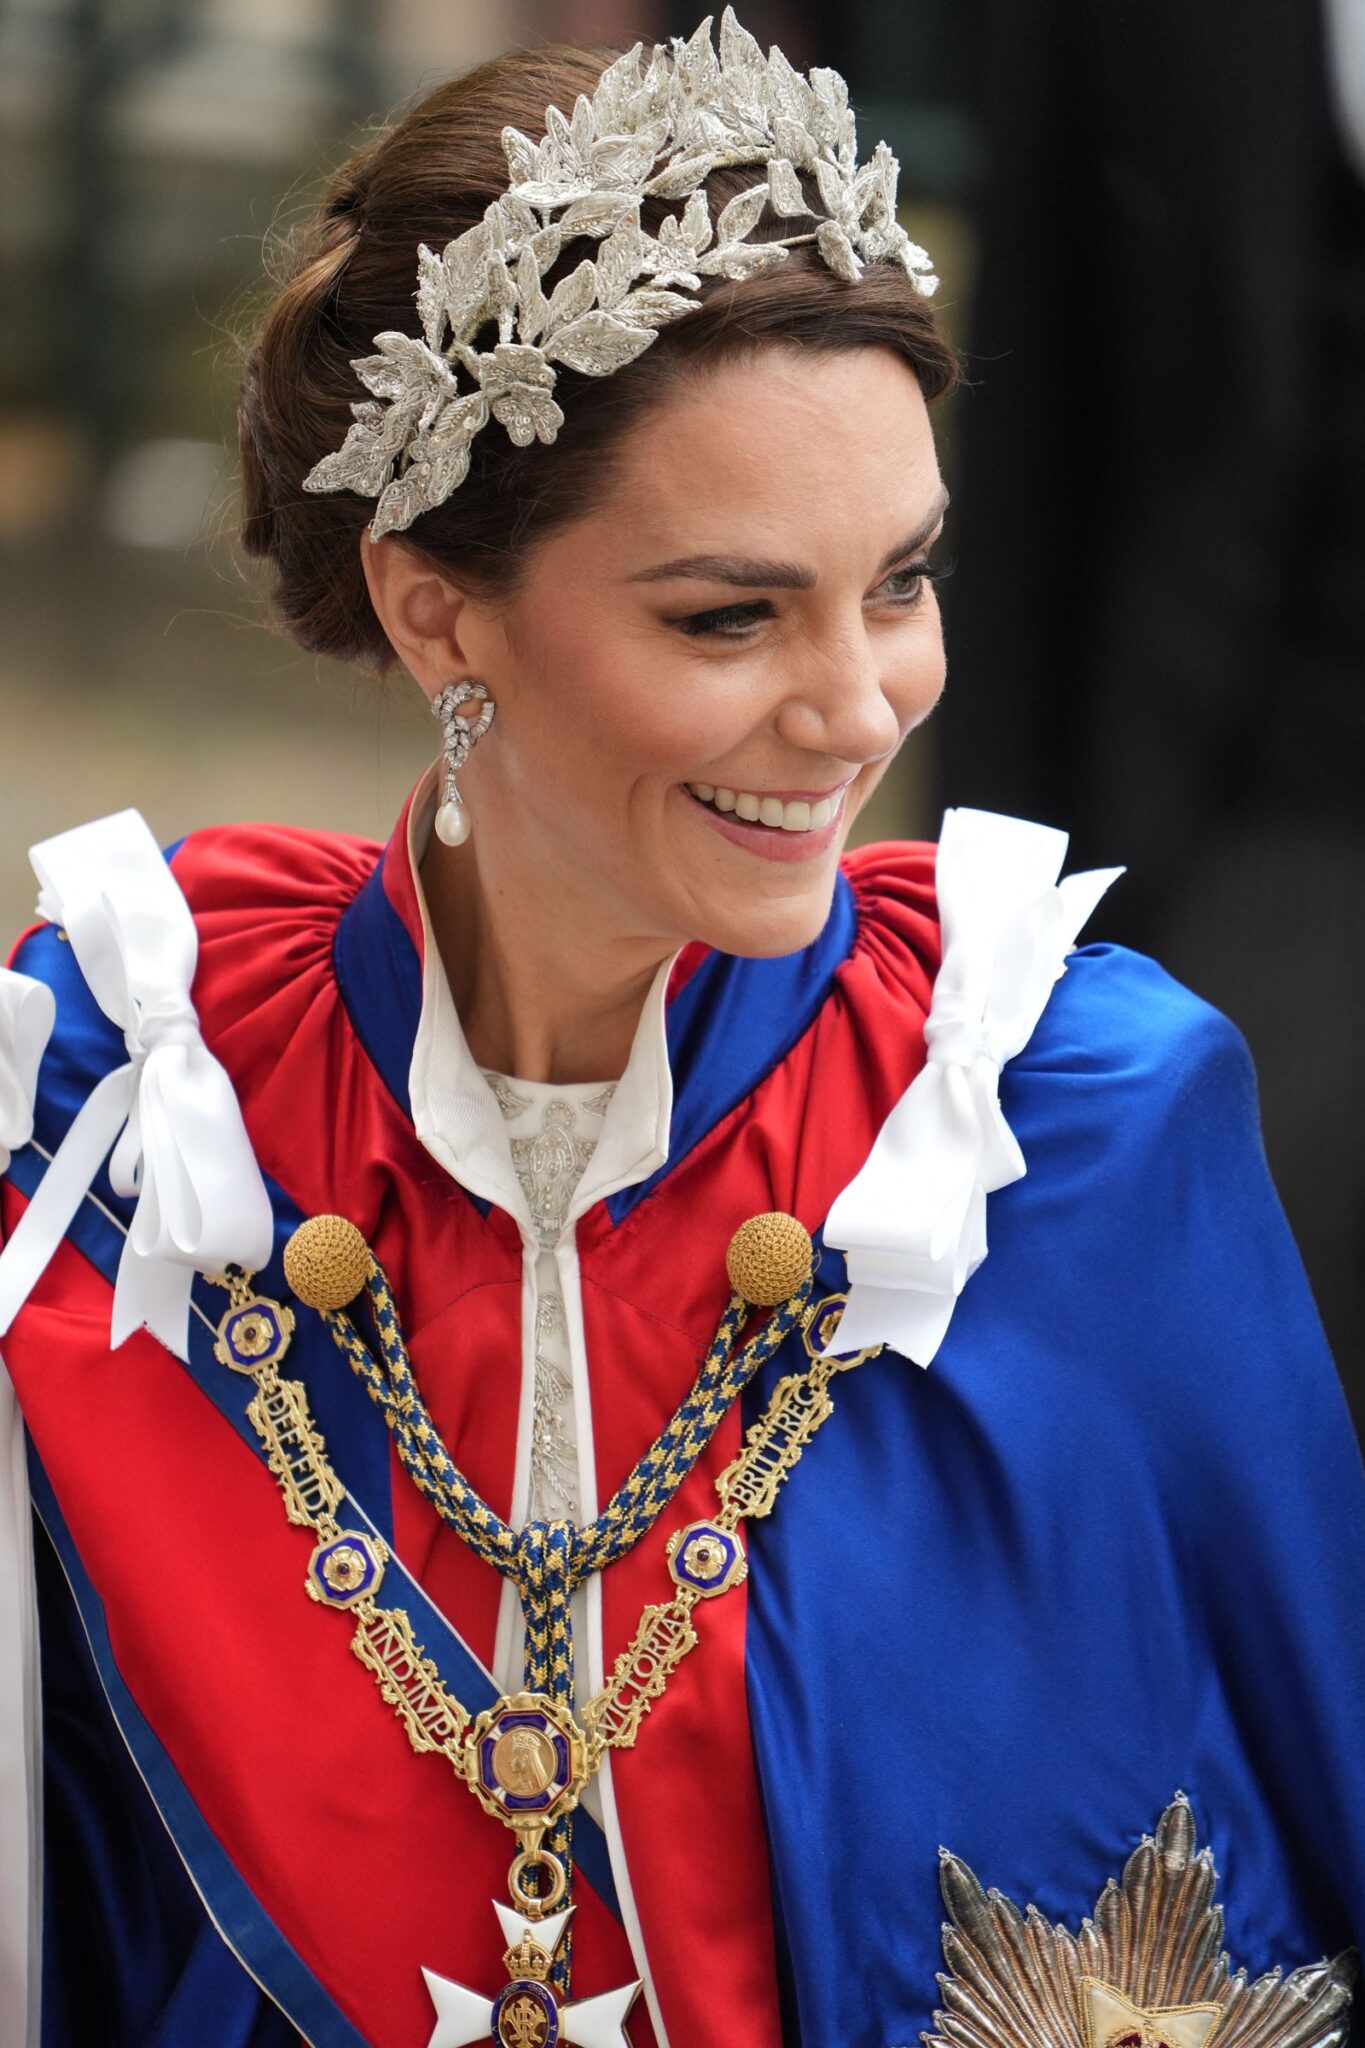 Kate Middleton's Coronation Gown Featured a Subtle Nod To Her Wedding ...